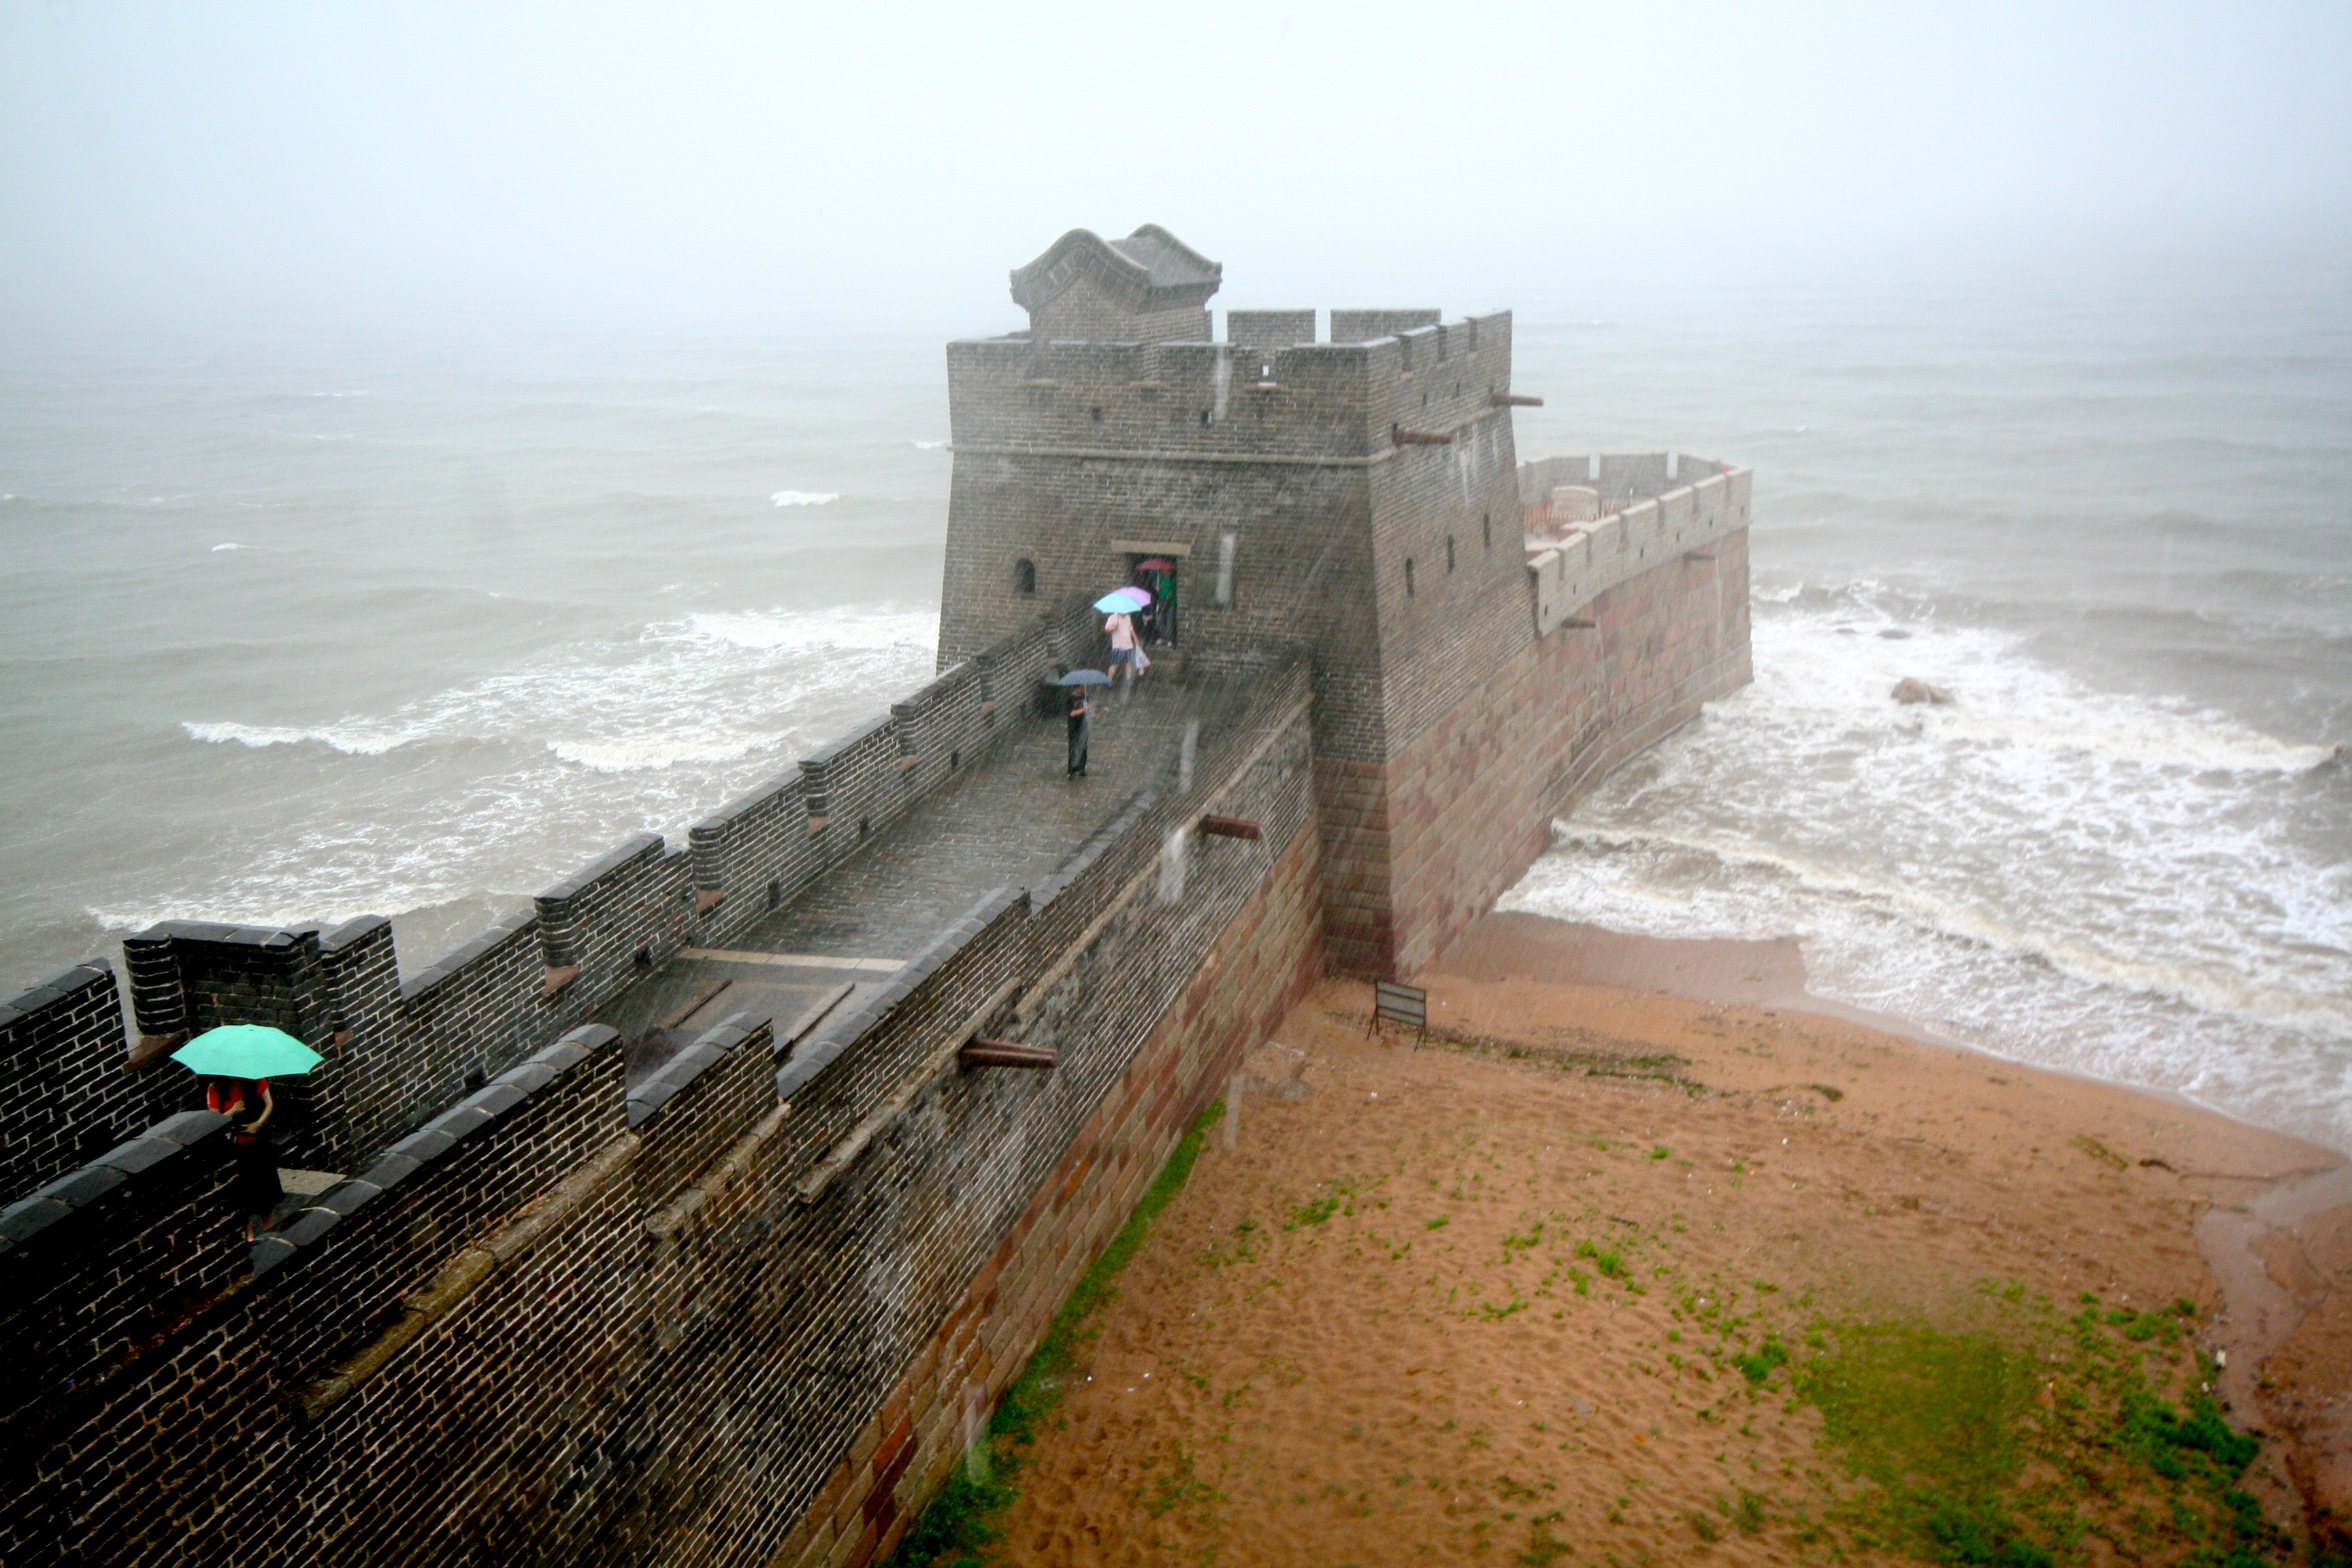 Where the Great Wall of China ends